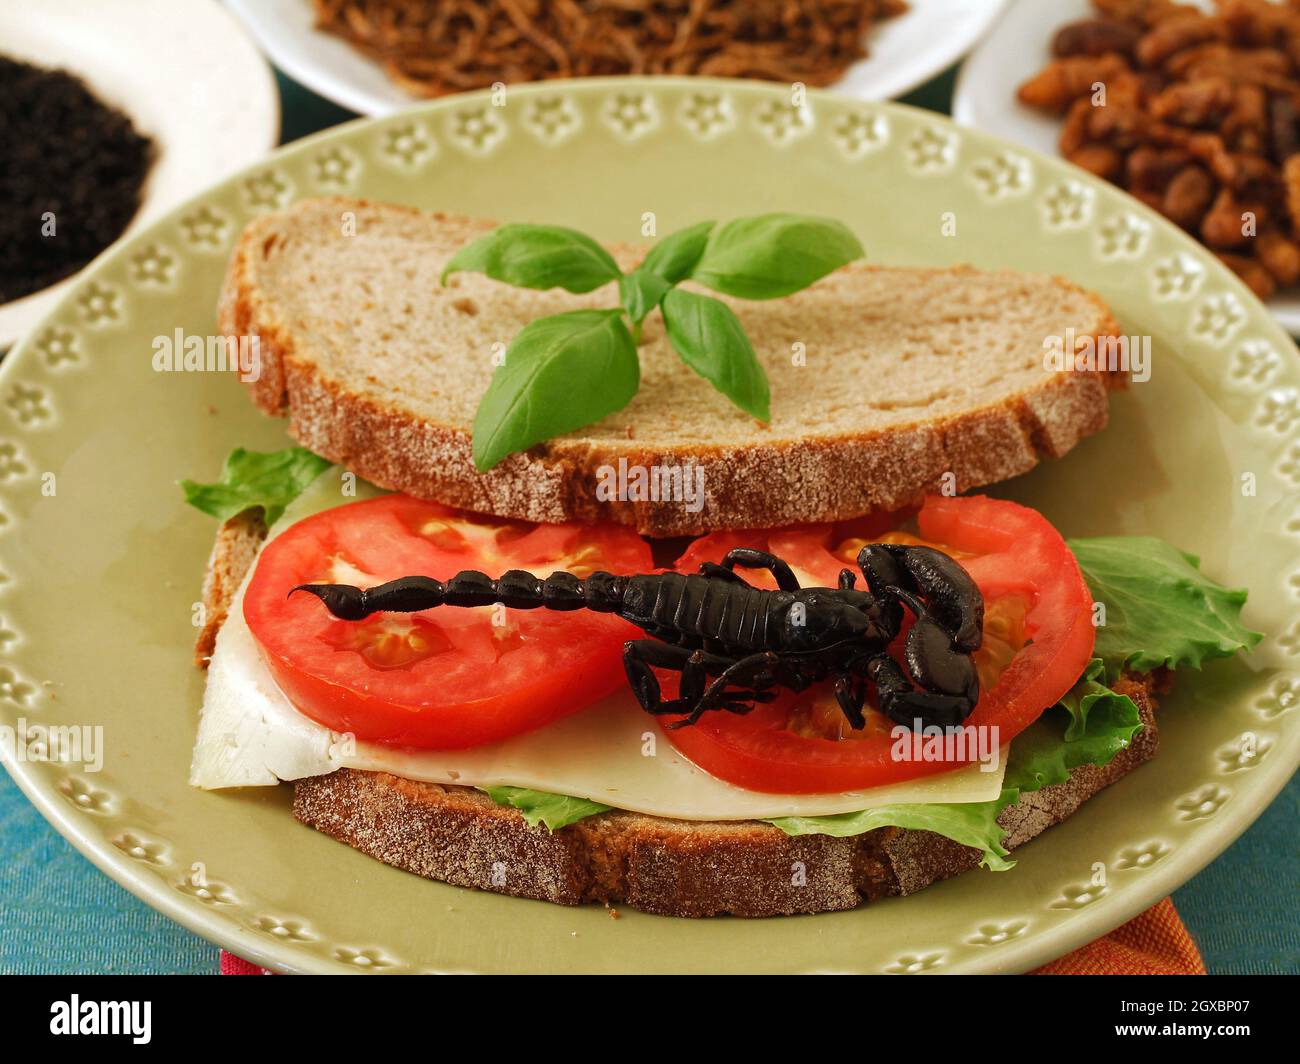 Edible arachnid and insects. Scorpion, mealworms and ants. Stock Photo